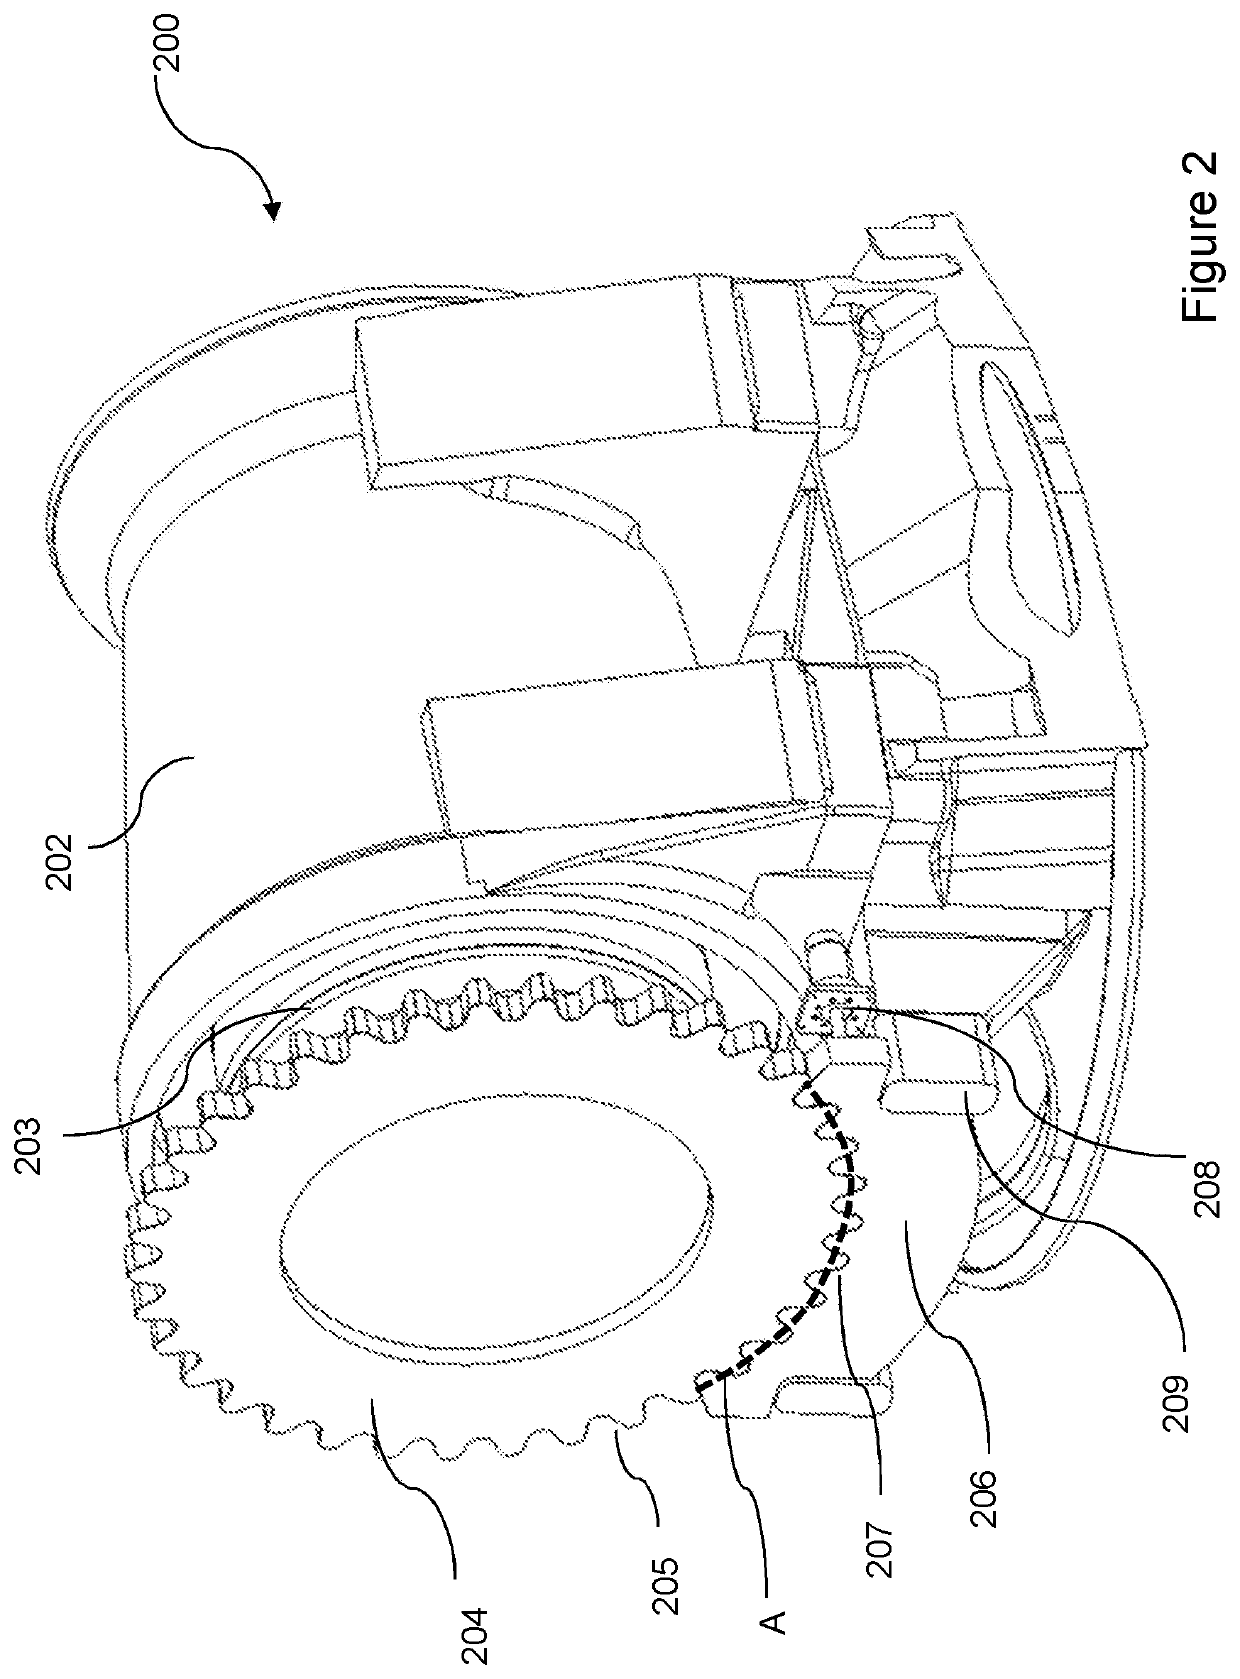 Rotor restraining apparatus and method for wind turbines